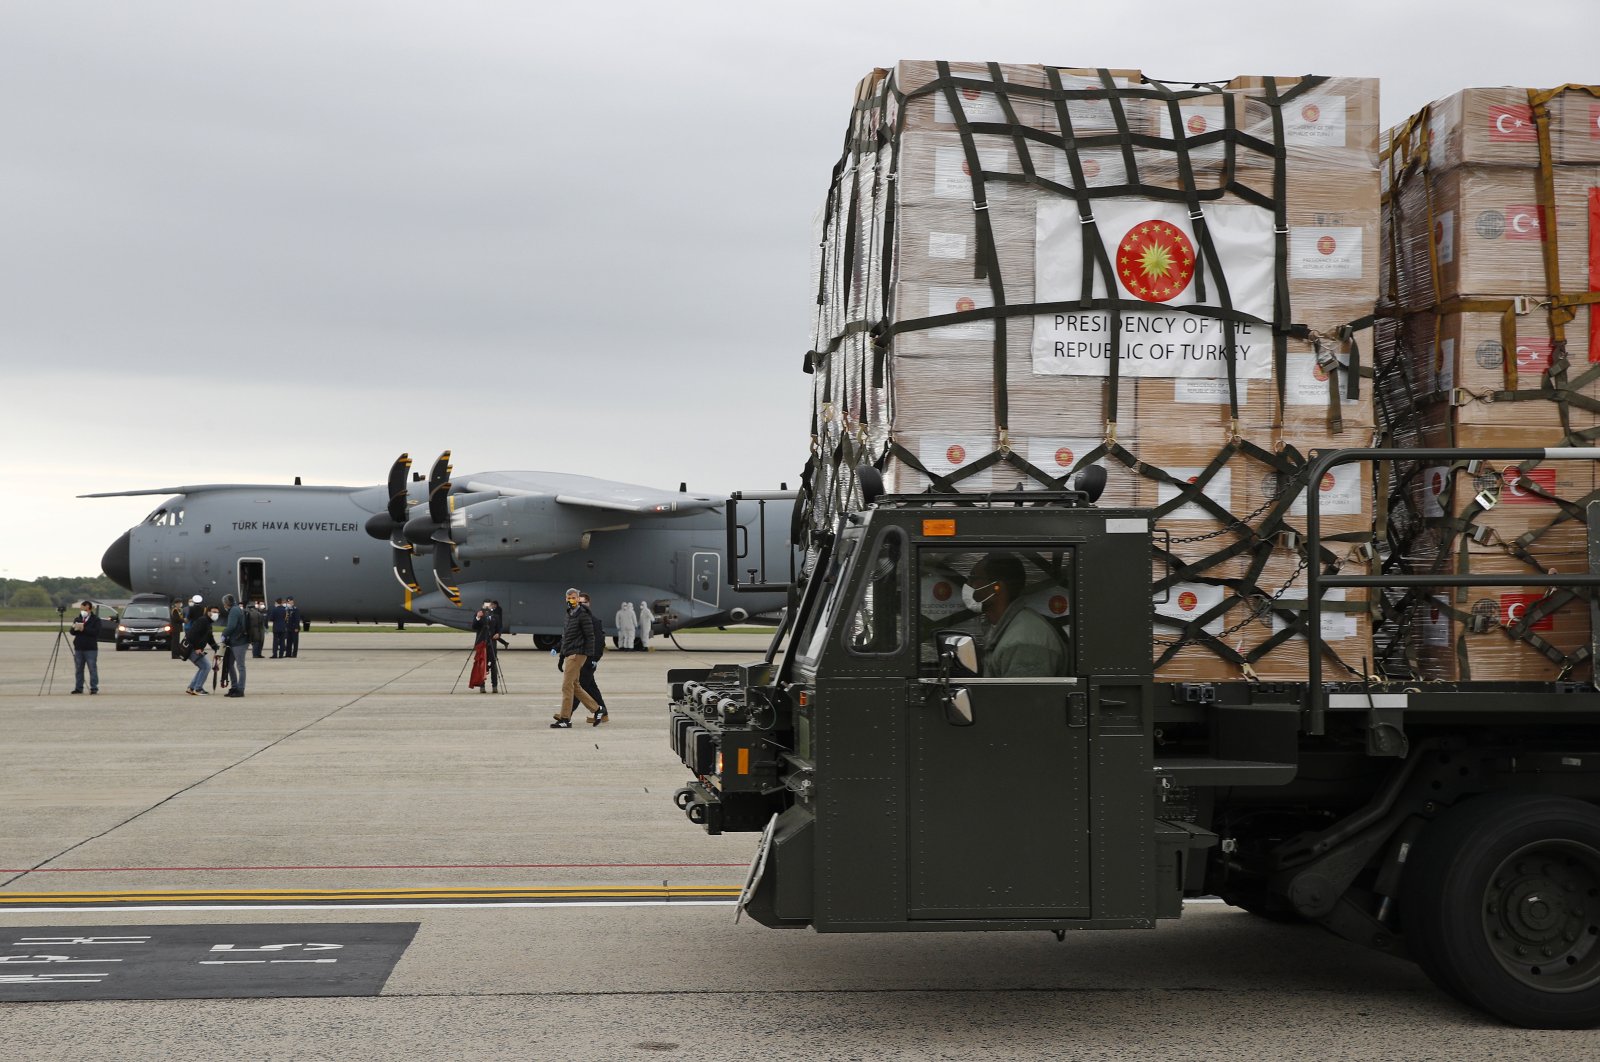 A U.S. Air Force vehicle carries a donation of medical supplies from Turkey after it was unloaded from a military plane, April 28, 2020. (AP Photo) 